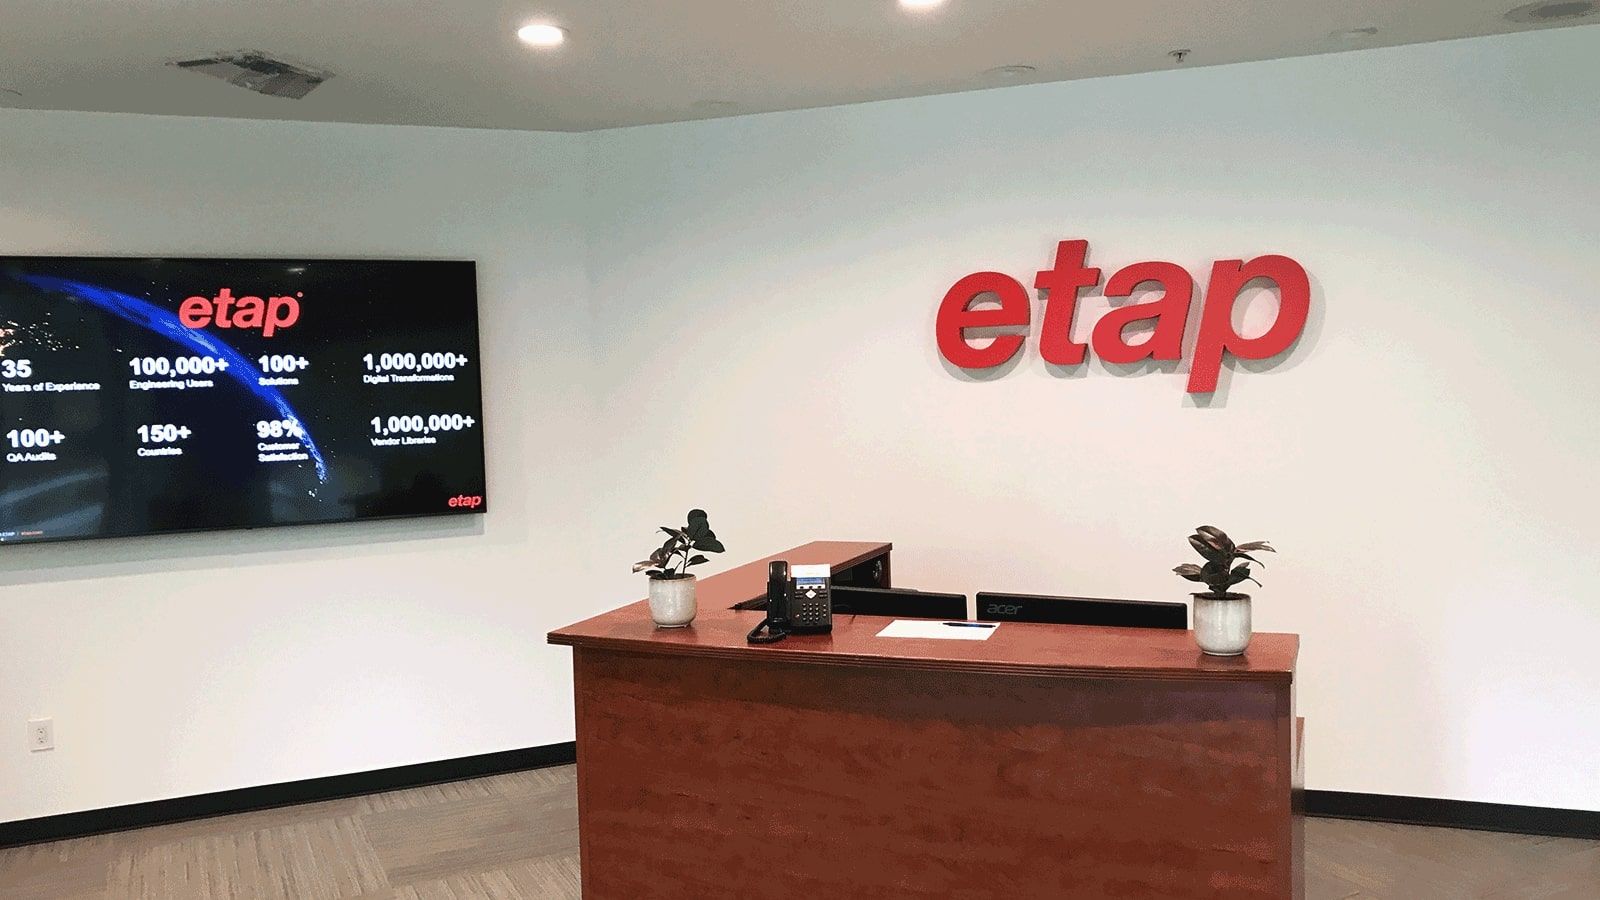 Etap logo sign attached to the wall